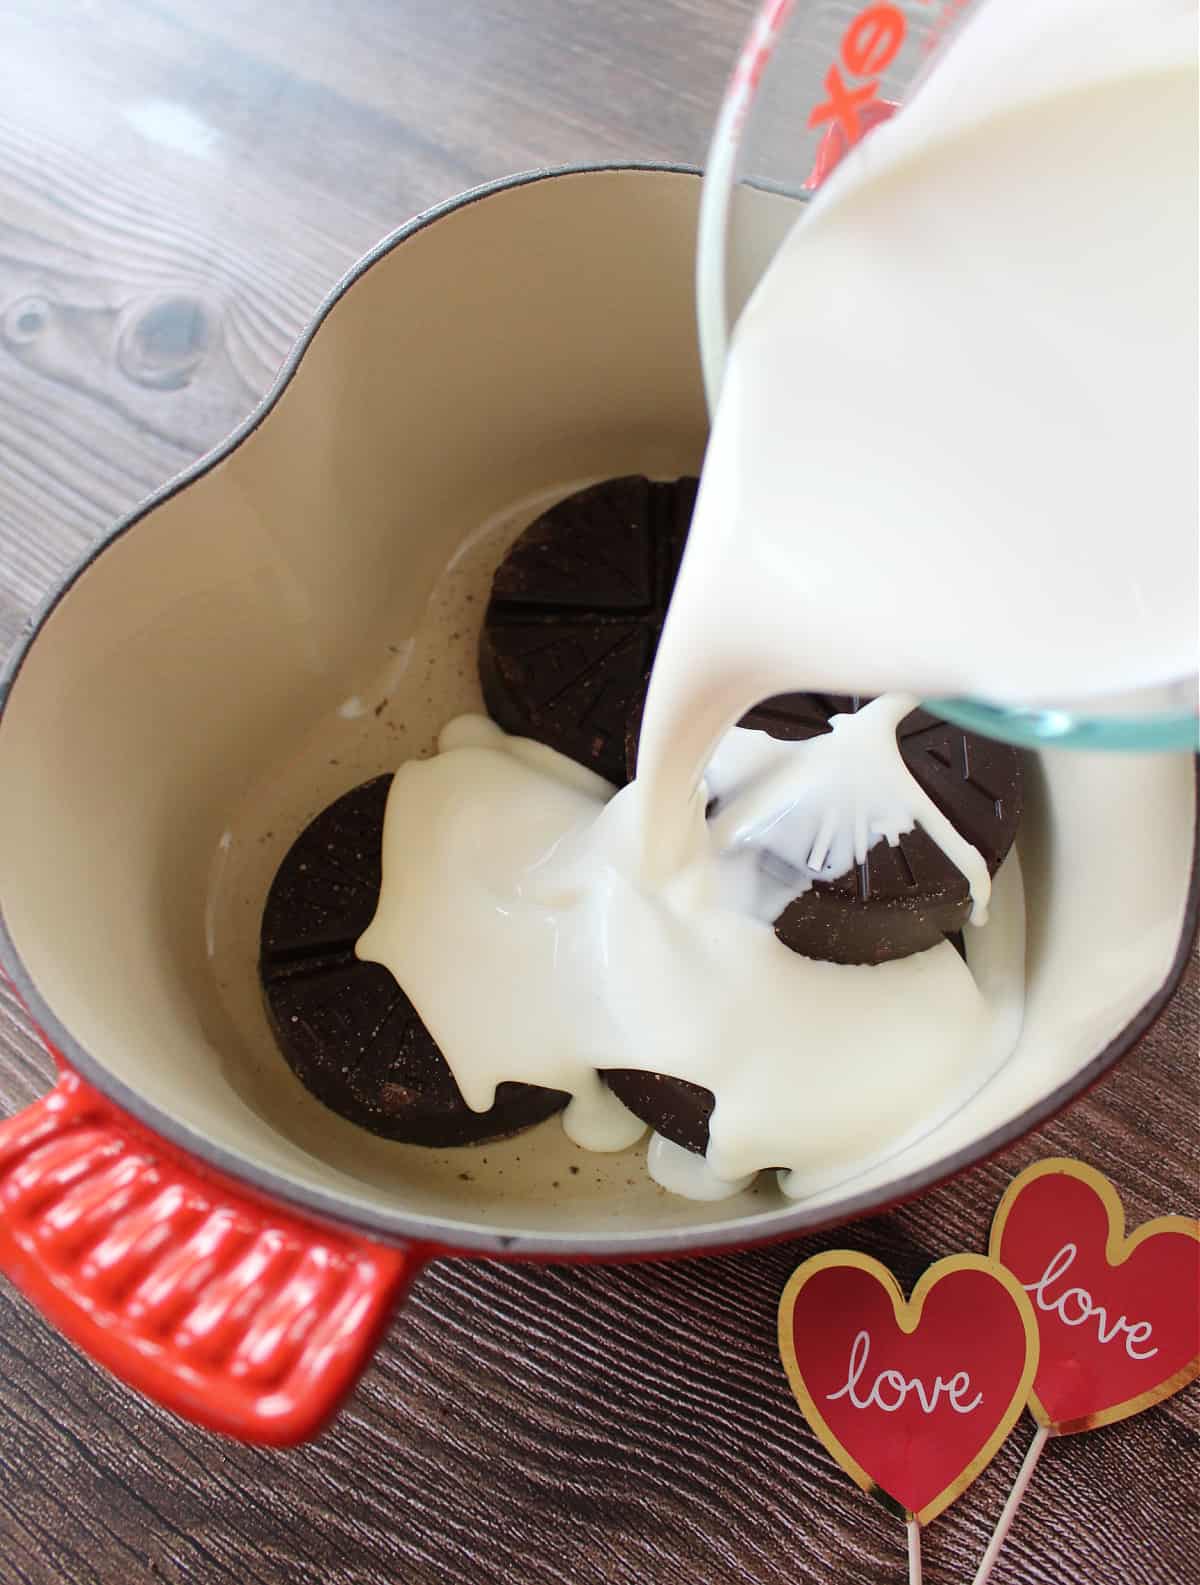 A measuring cup pouring heavy cream into a pot with chocolate.